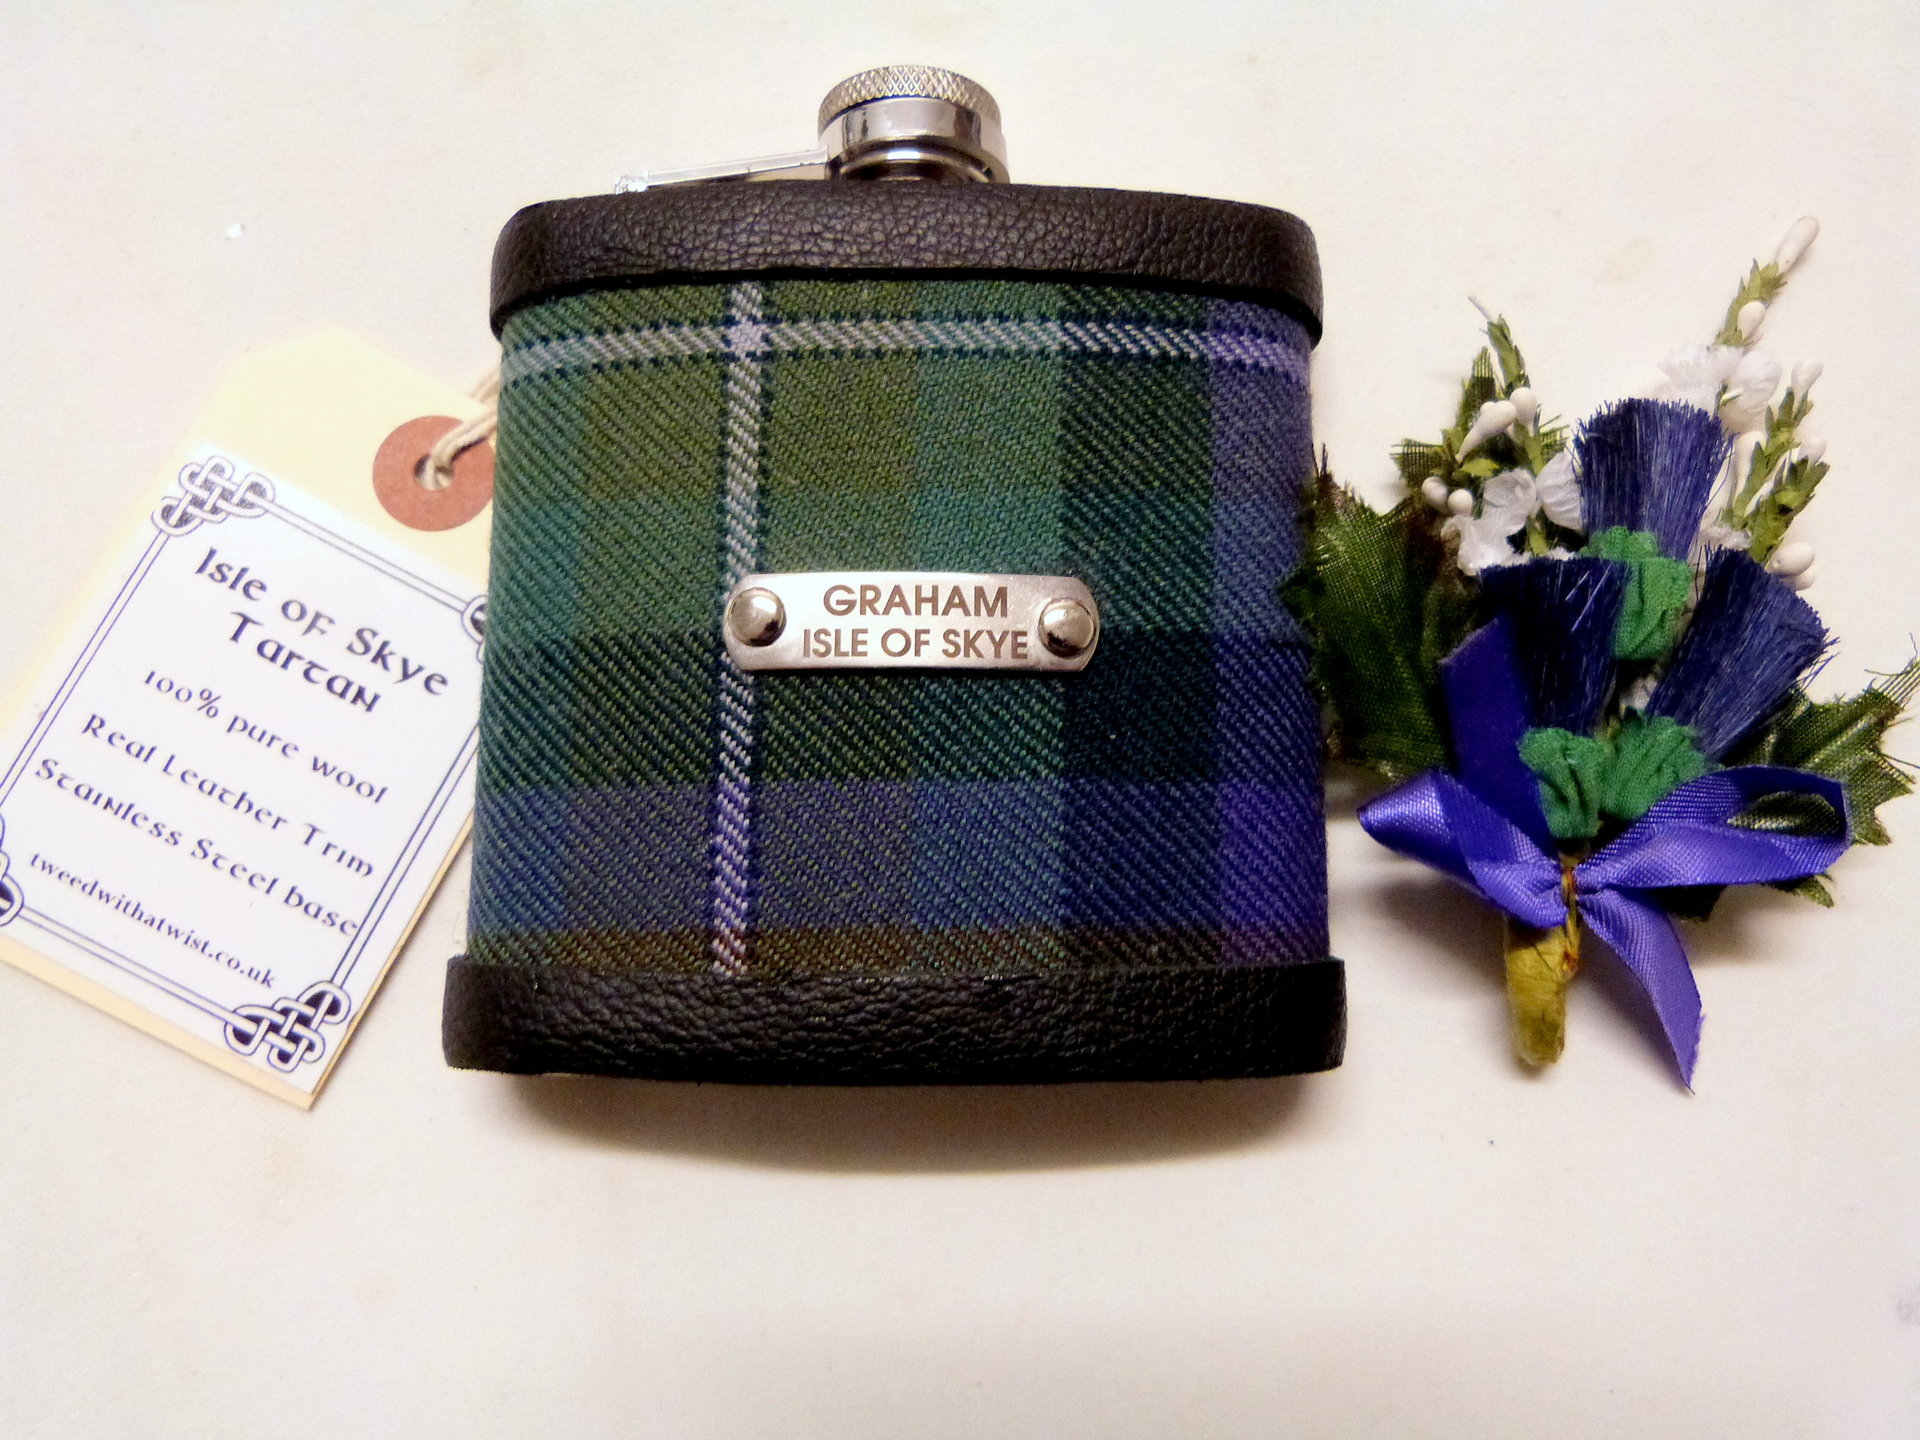 Custom tartan flasks with individual engraved names for Best Man, Father of Bride or groomsmen .Scottish luxury gift in sets of 3 - 6